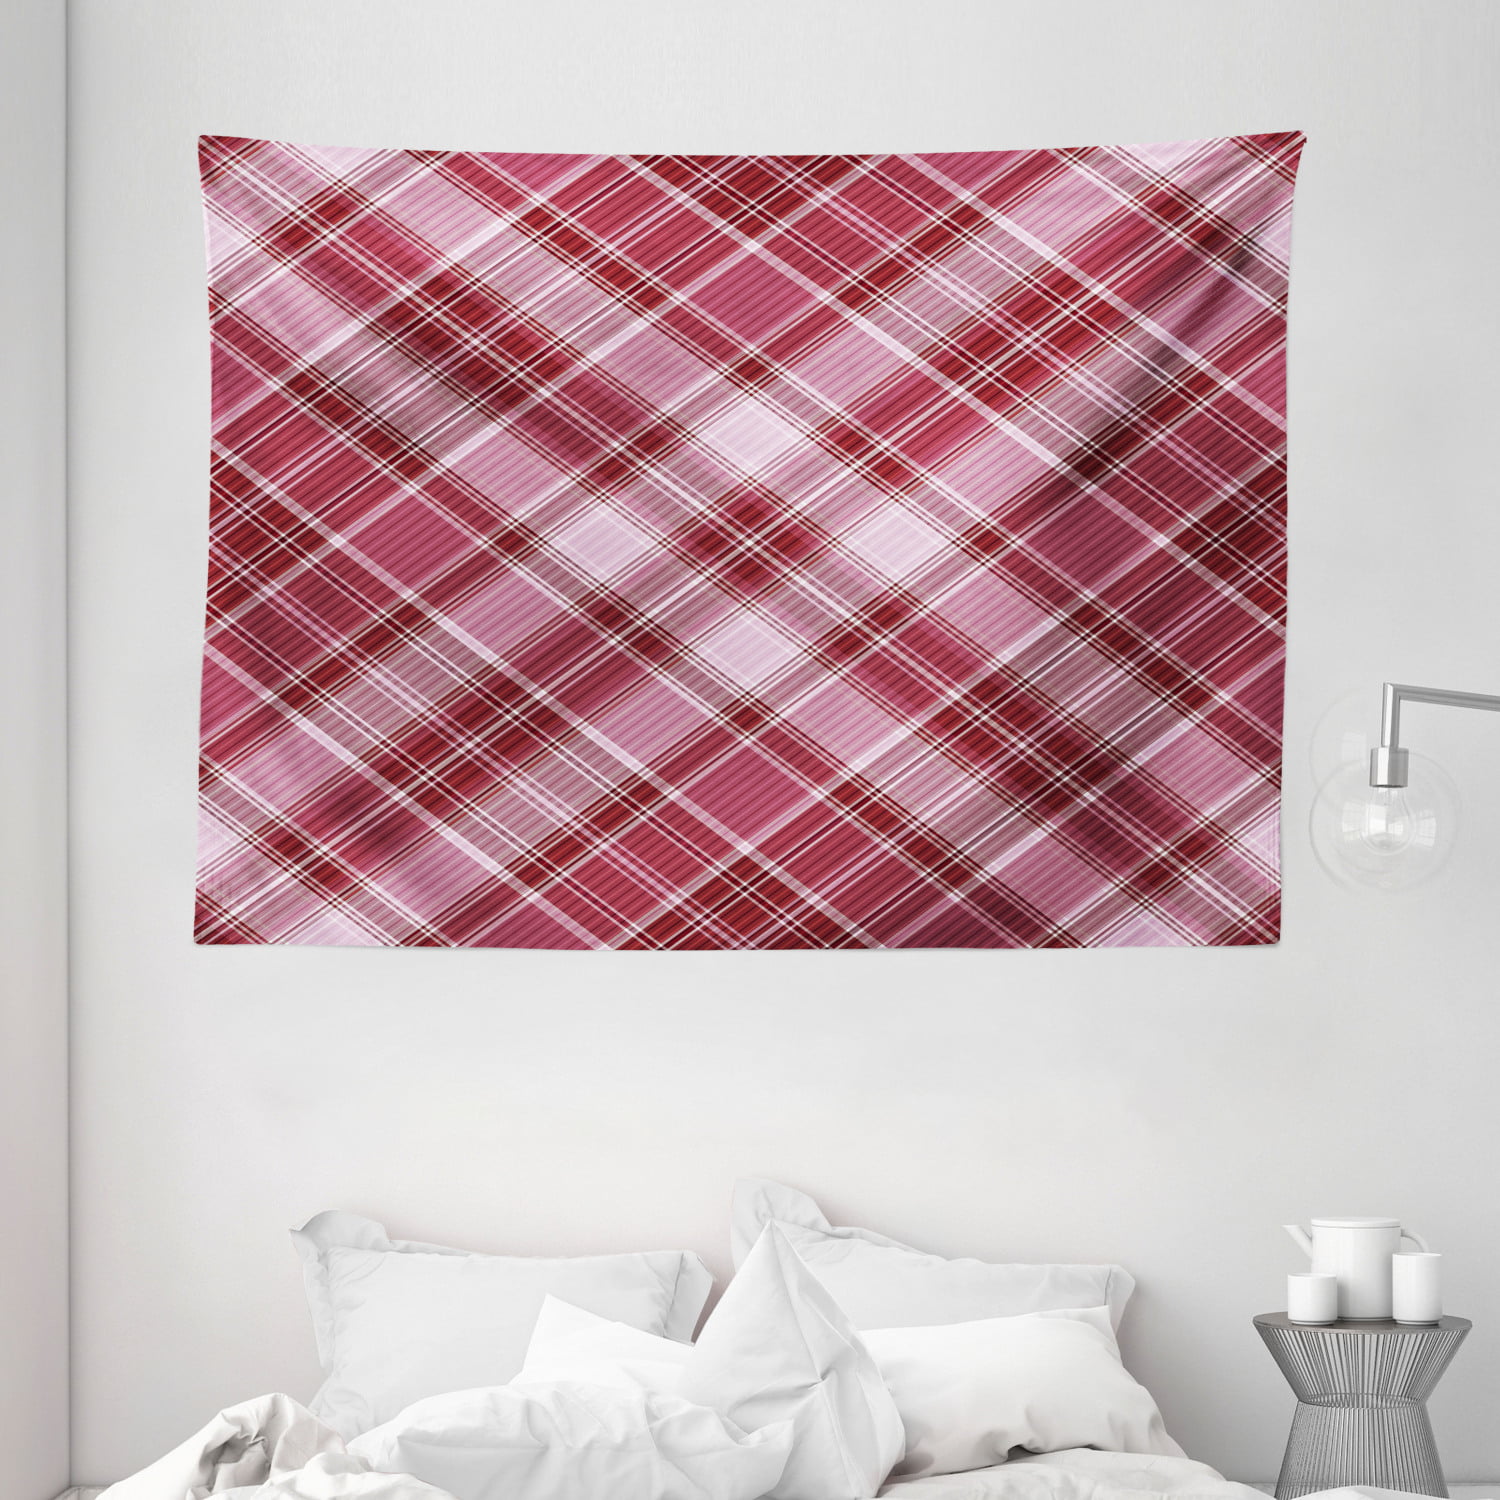 Checkered Tapestry, Cross Checkered Pattern with Diagonal Strips and  Rhombus Shapes, Wall Hanging for Bedroom Living Room Dorm Decor, 80W X 60L  Inches, Dried Rose Ruby and White, by Ambesonne